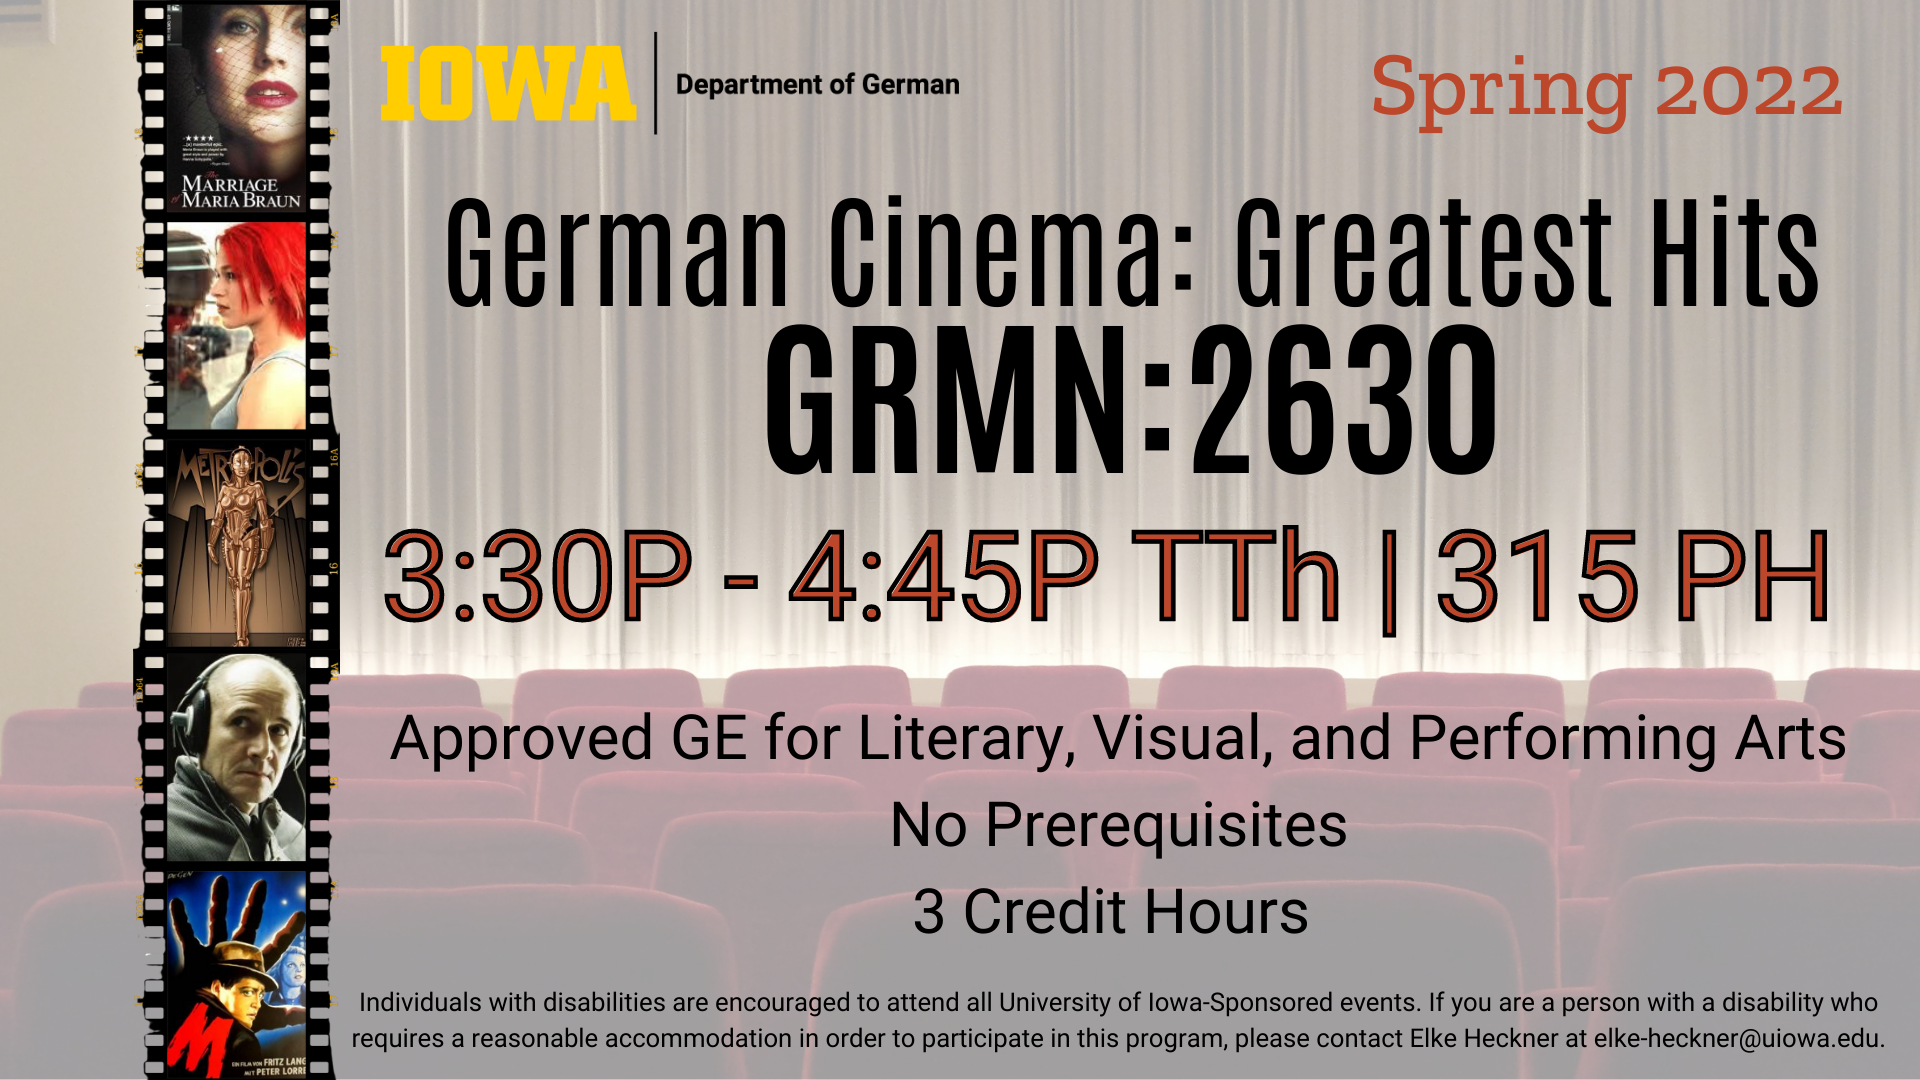 Course for Spring 2022 German Cinema Greatest Hits course number GRMN 2630 class is from 3 thirty to 4 forty five tuesdays and thursdays in 315 phillips hall. This course is an approved GE for Literary visual and performing arts. No prerequisites. 3 credit hours. 